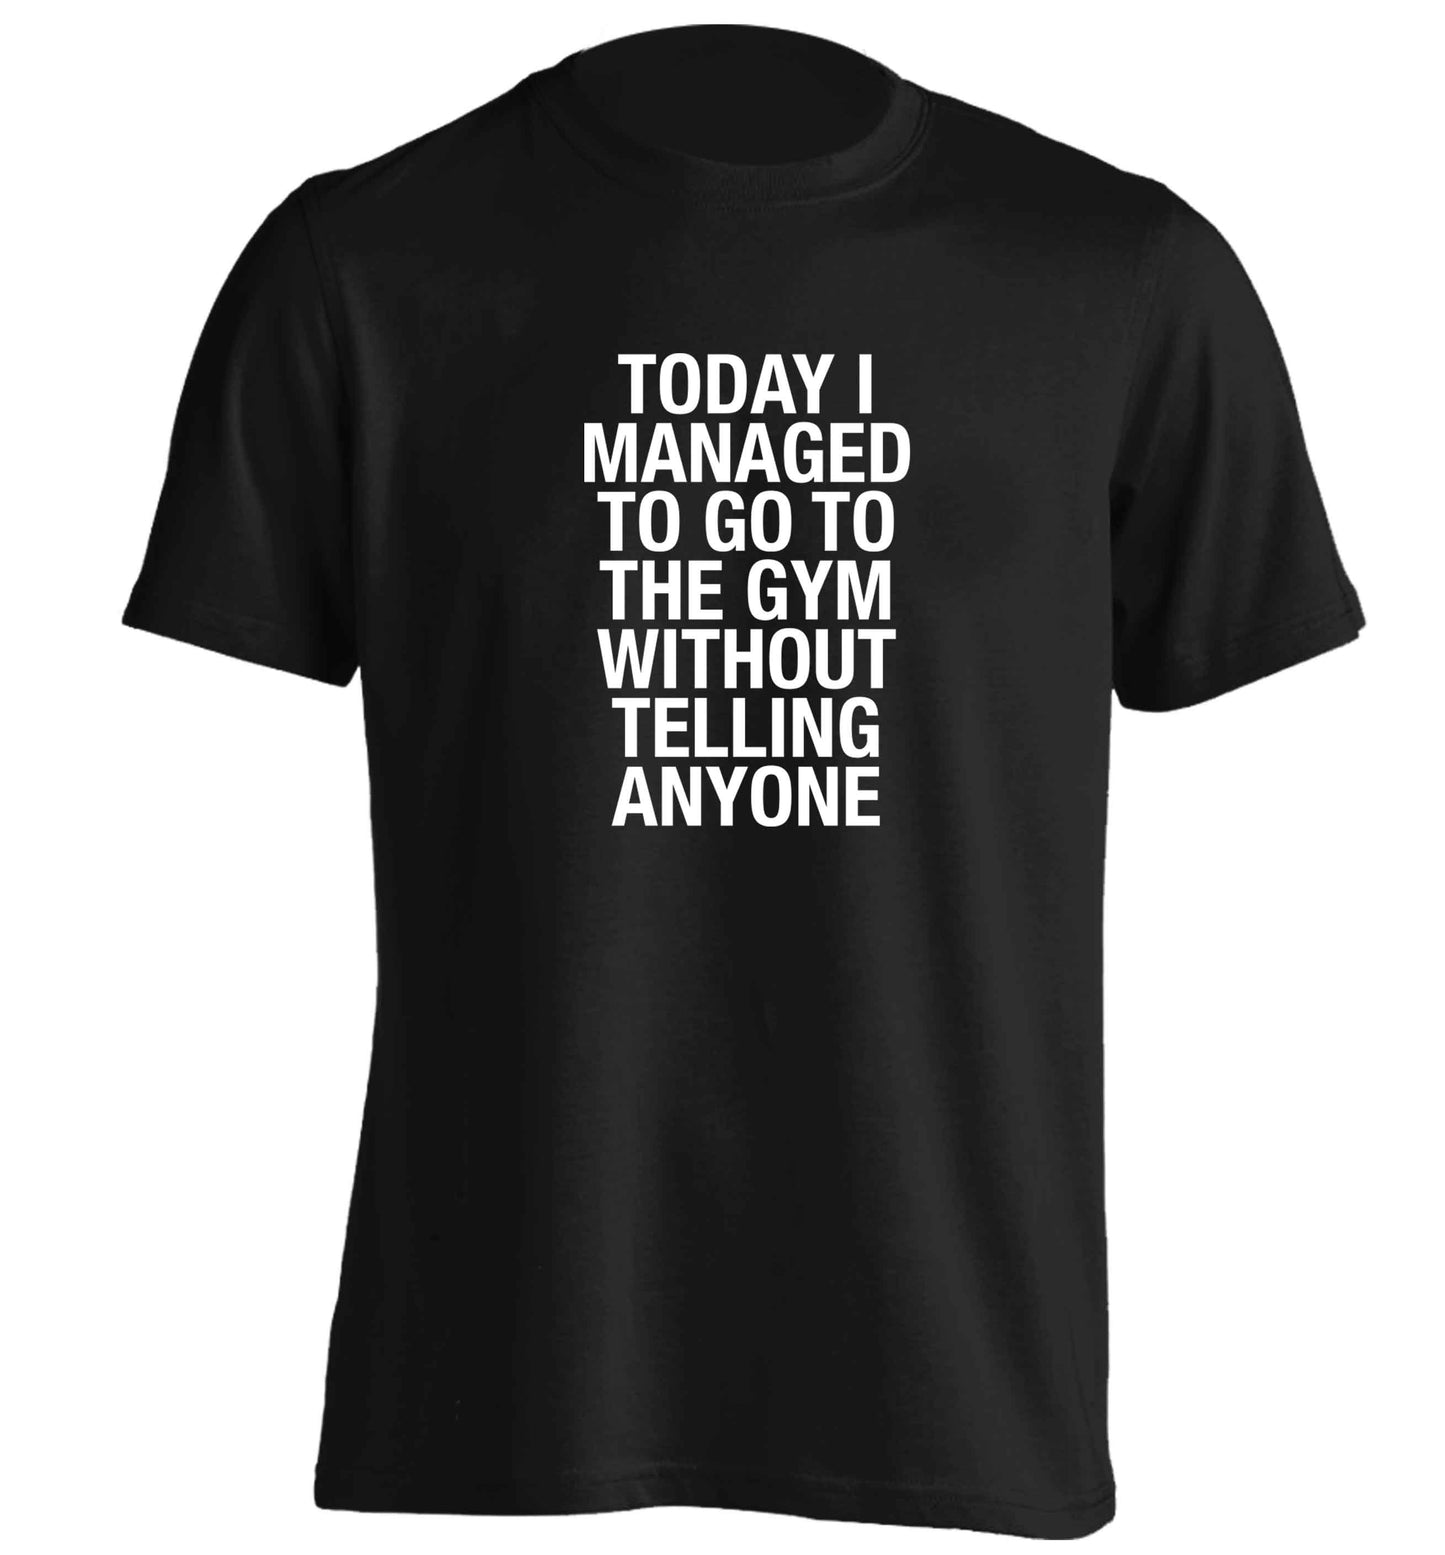 Today I managed to go to the gym without telling anyone adults unisex black Tshirt 2XL